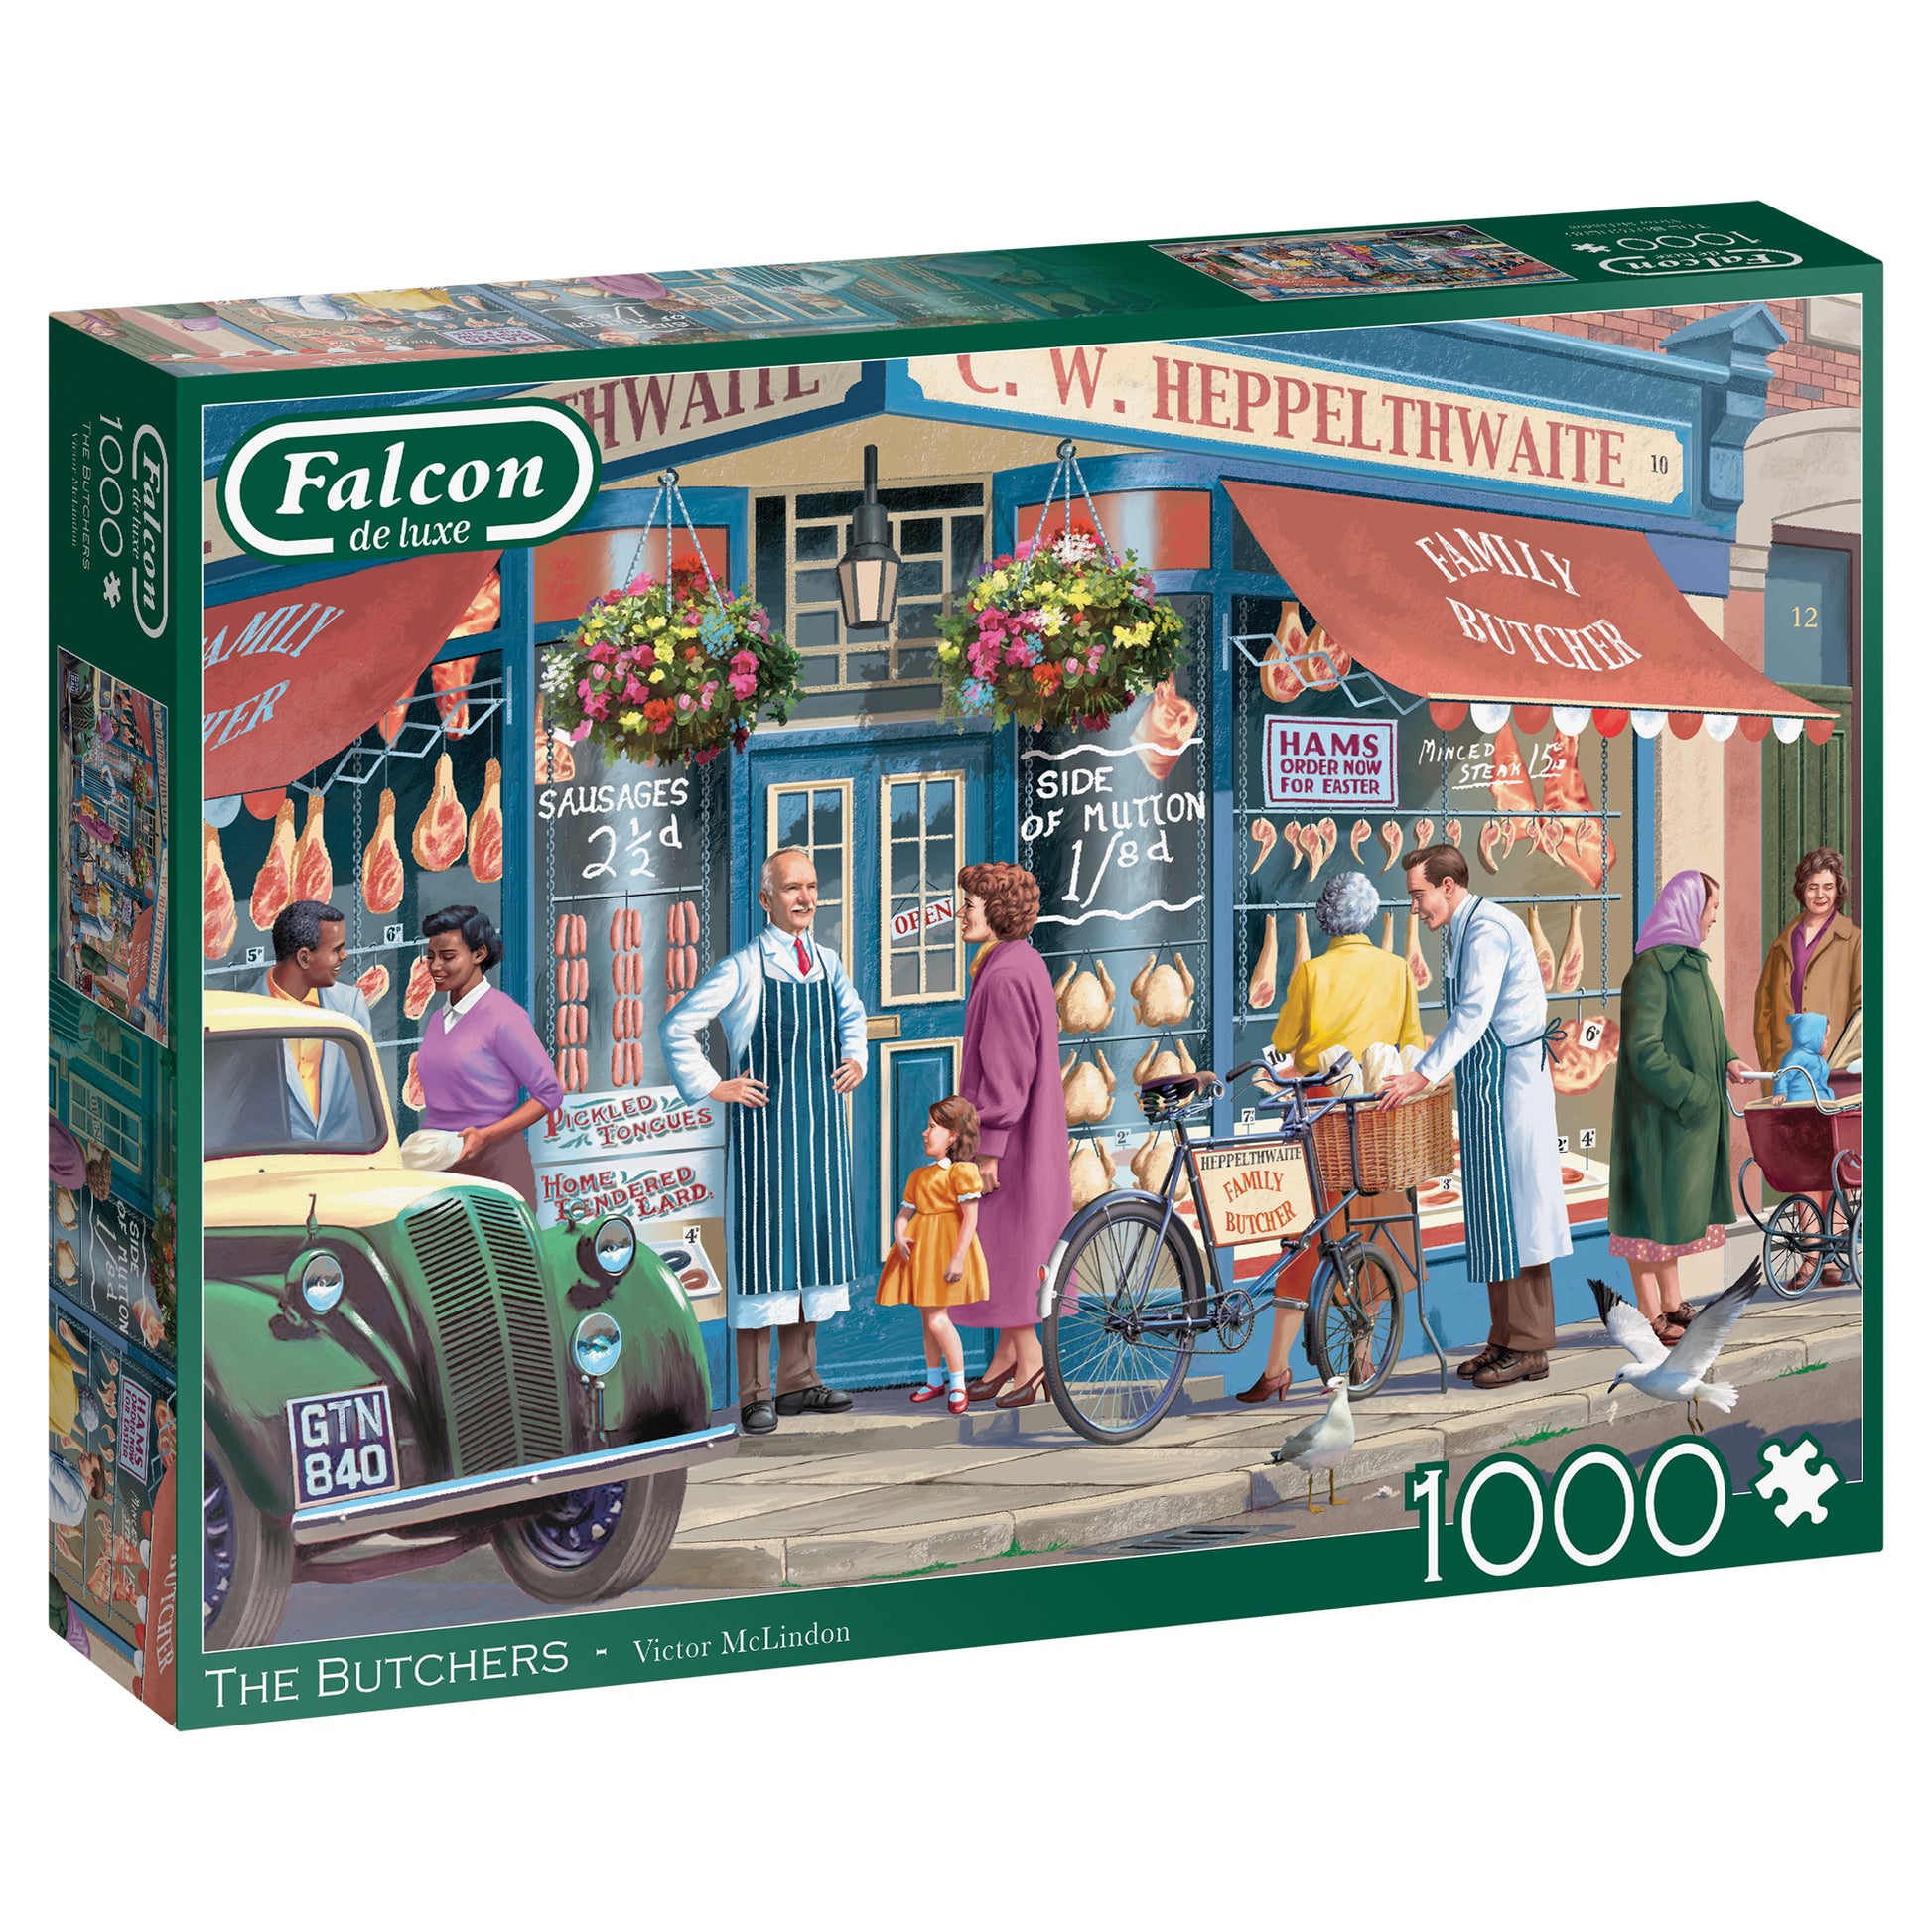 Falcon - The Butchers (1000 pieces) - product image - Jumboplay.com